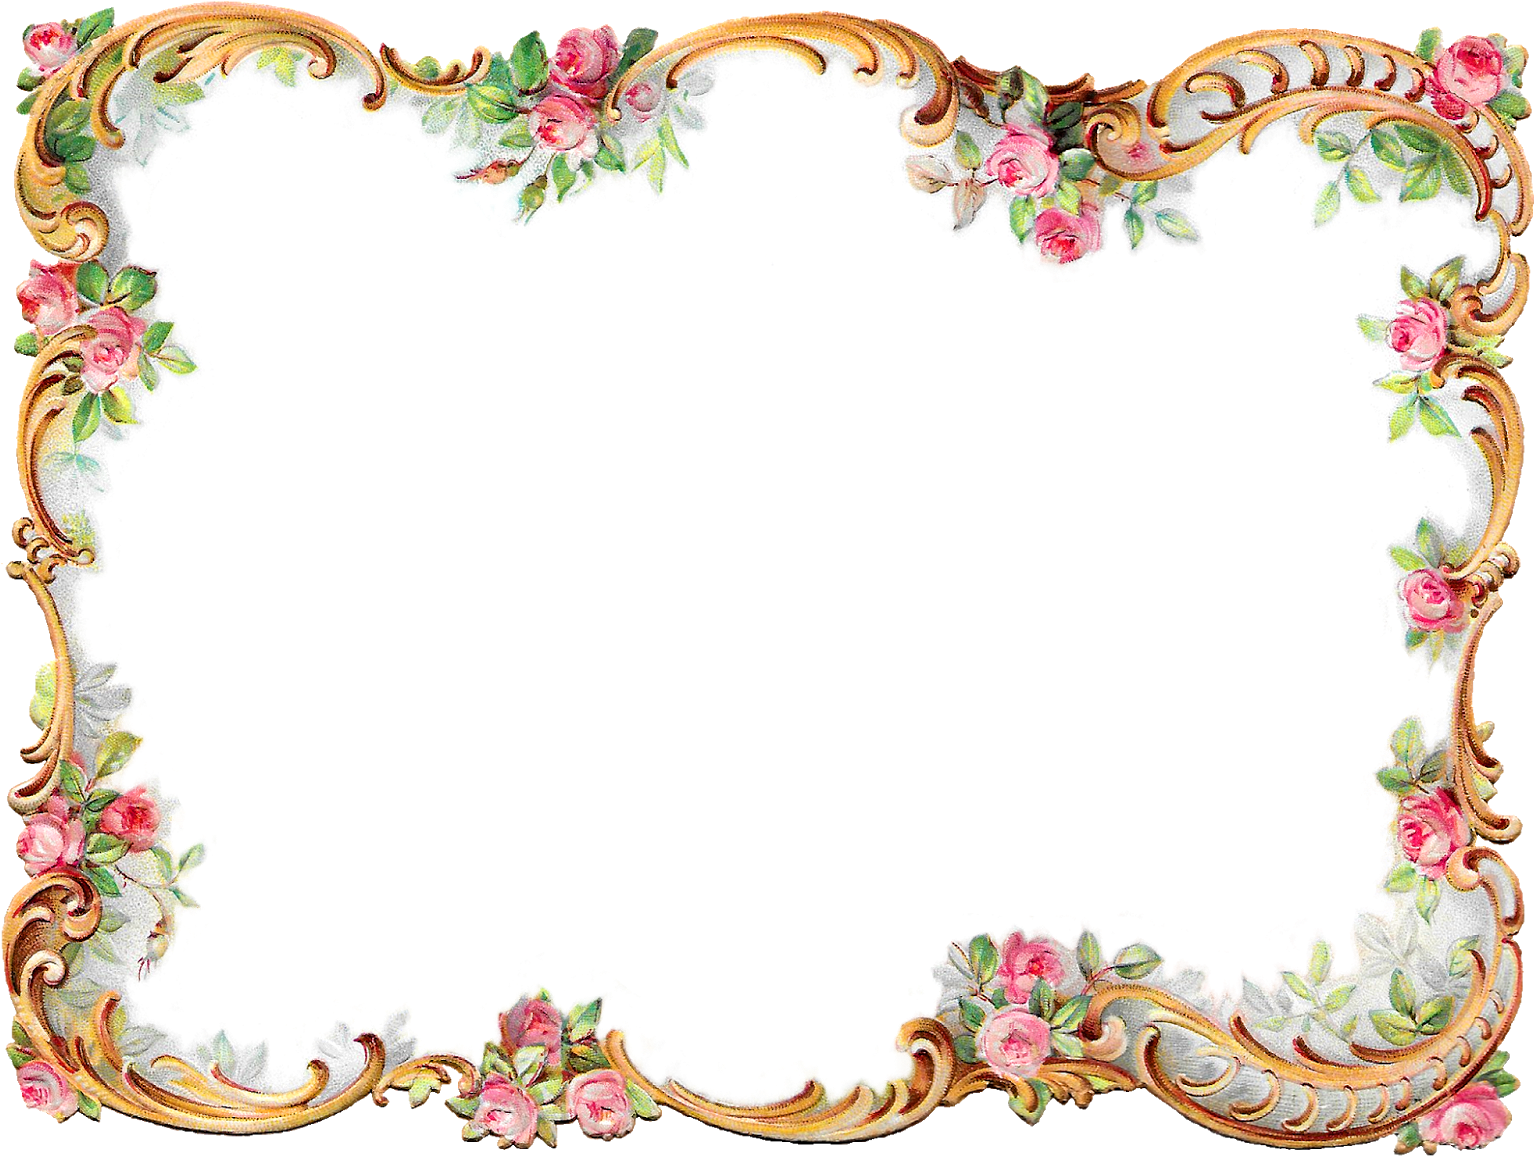 Antique Border PNG Image High Quality PNG Image